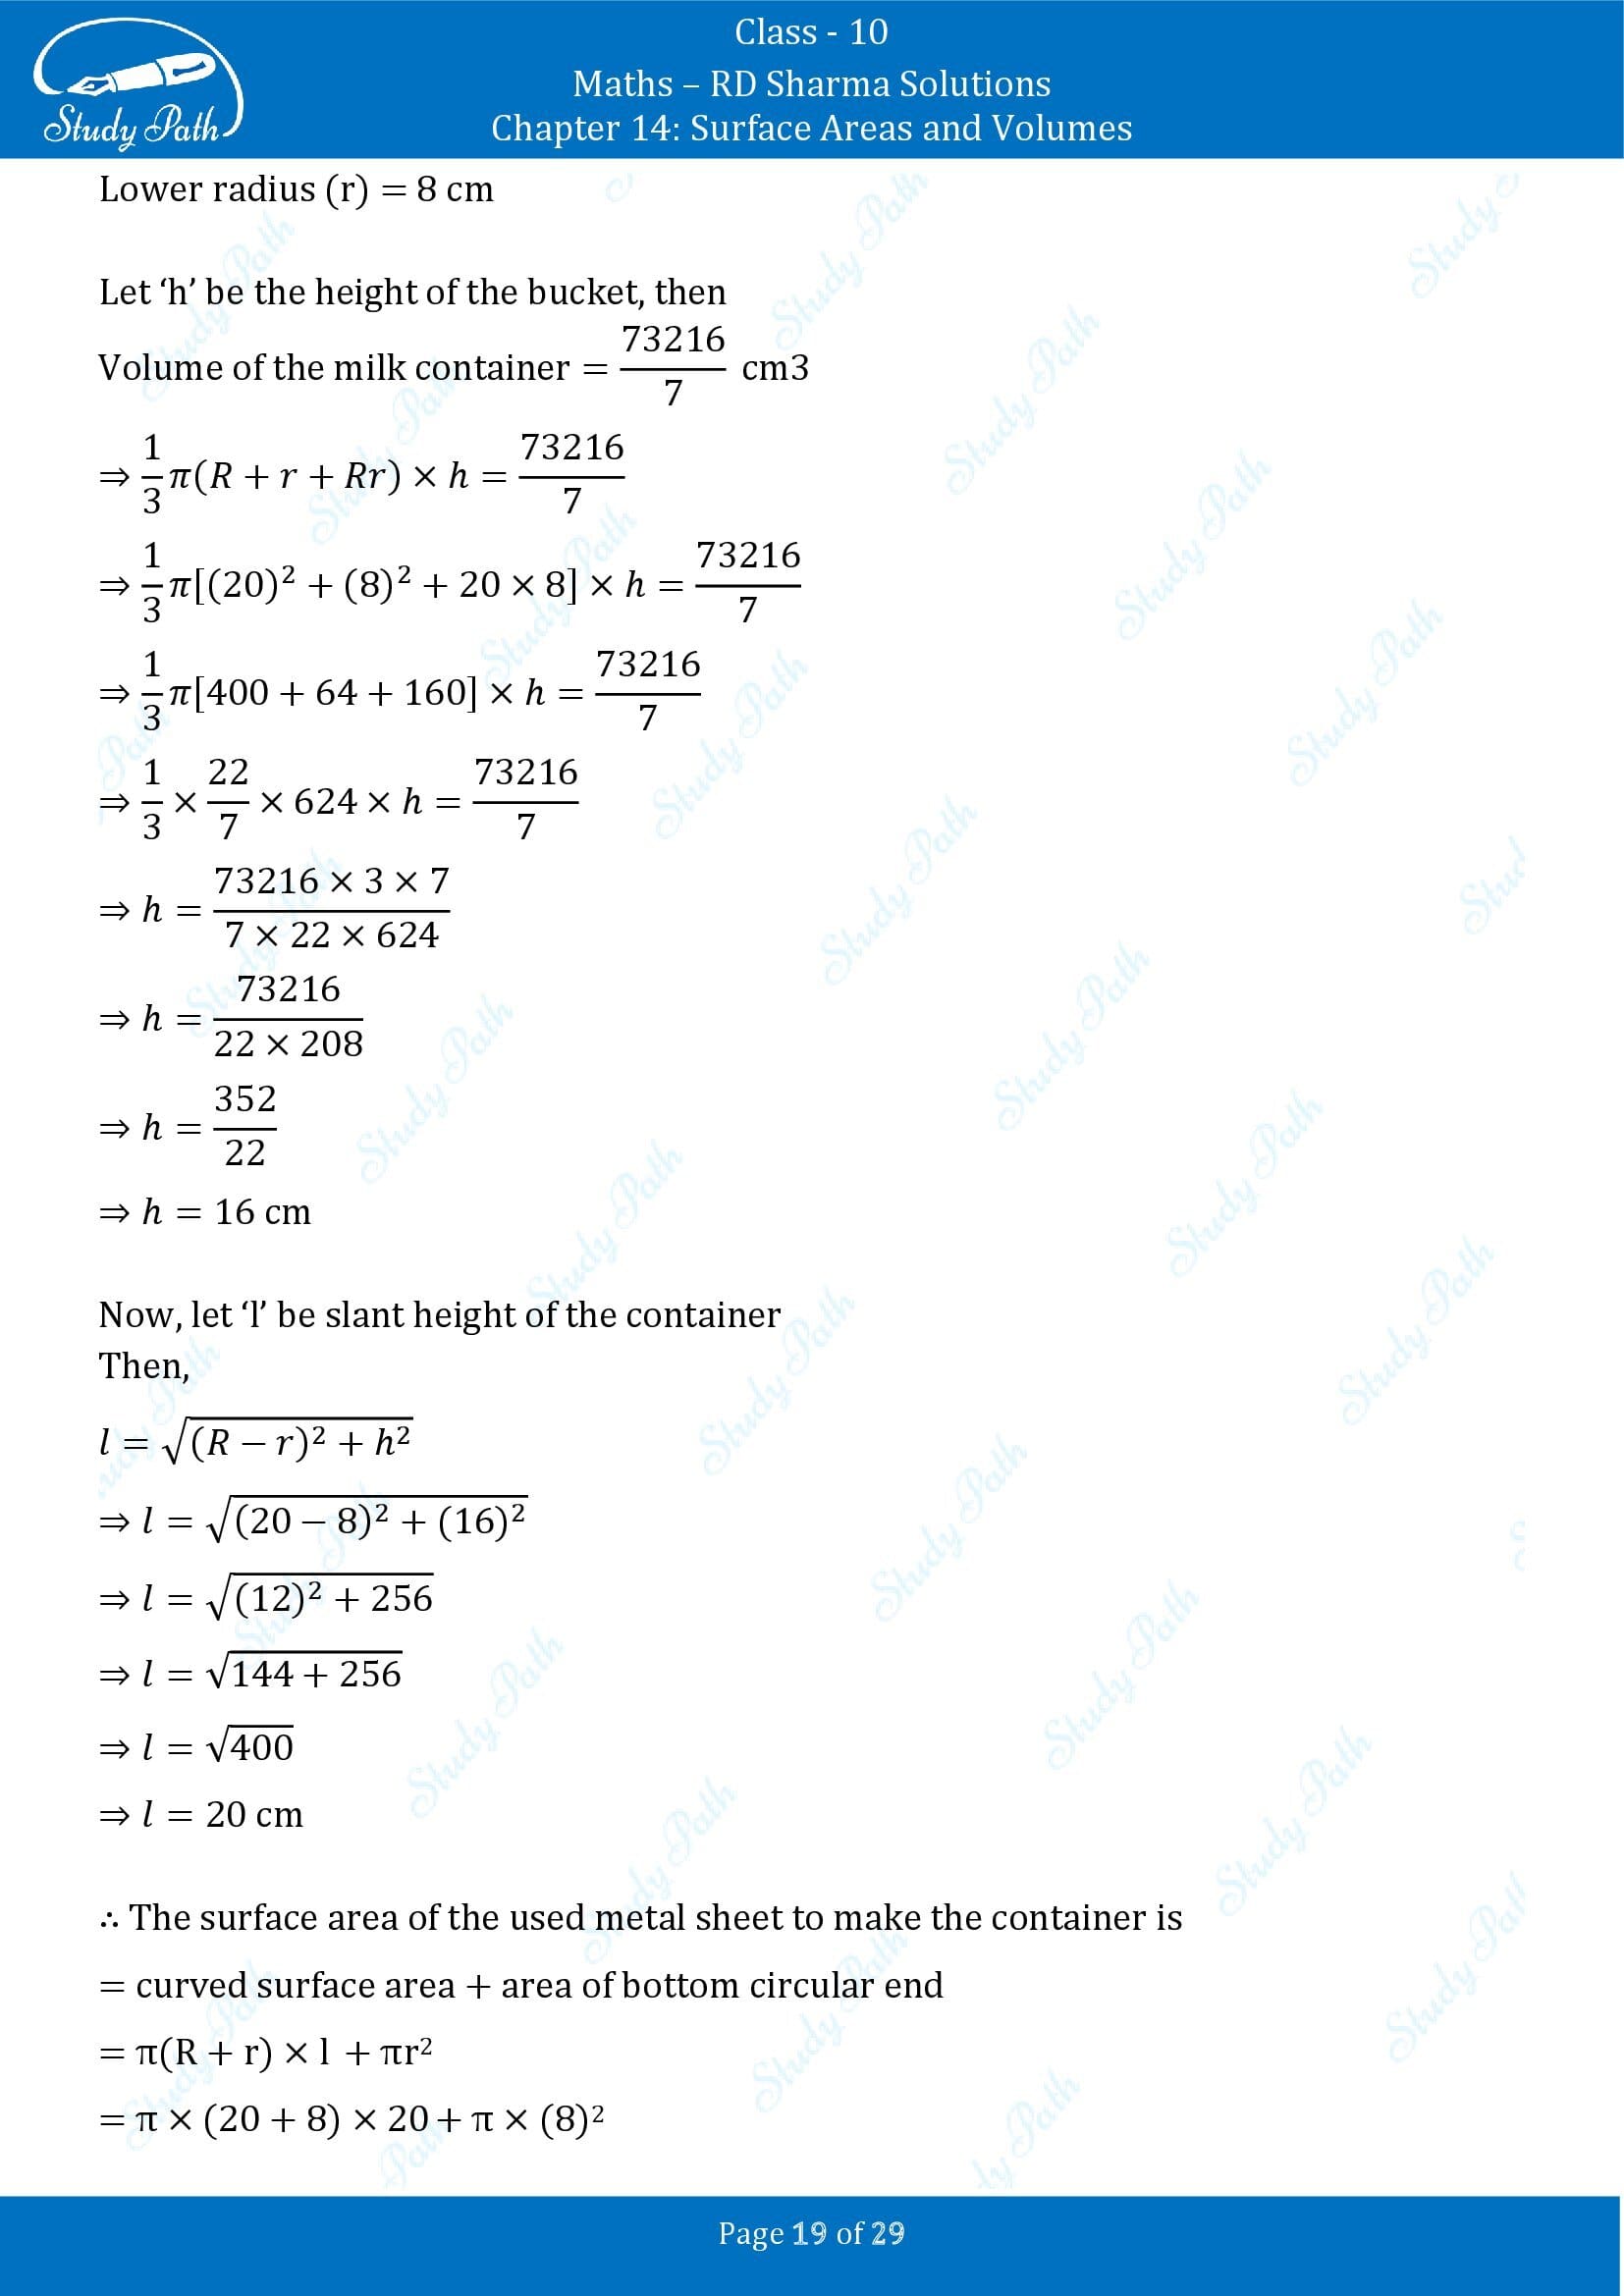 RD Sharma Solutions Class 10 Chapter 14 Surface Areas and Volumes Exercise 14.3 00019